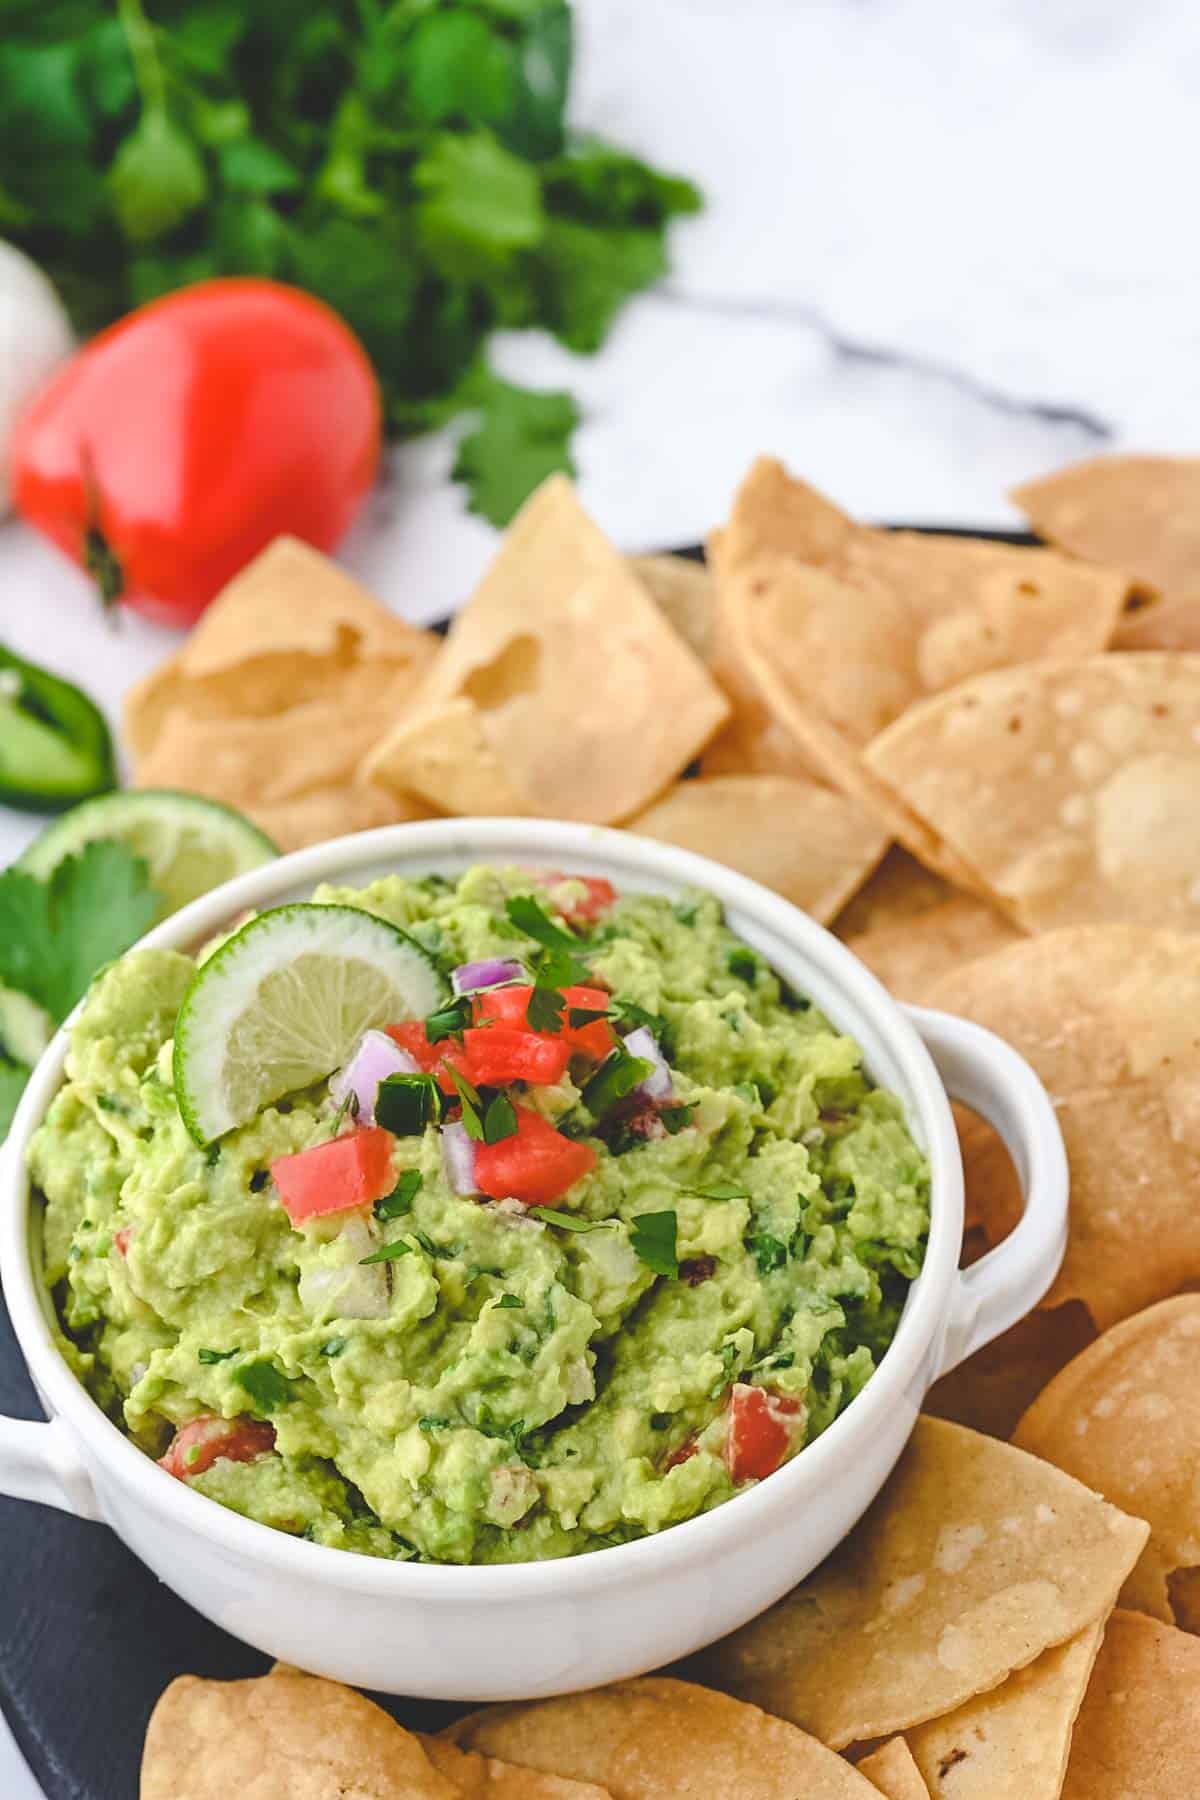 A bowl of fresh guacamole surrounded by homemade tortilla chips.